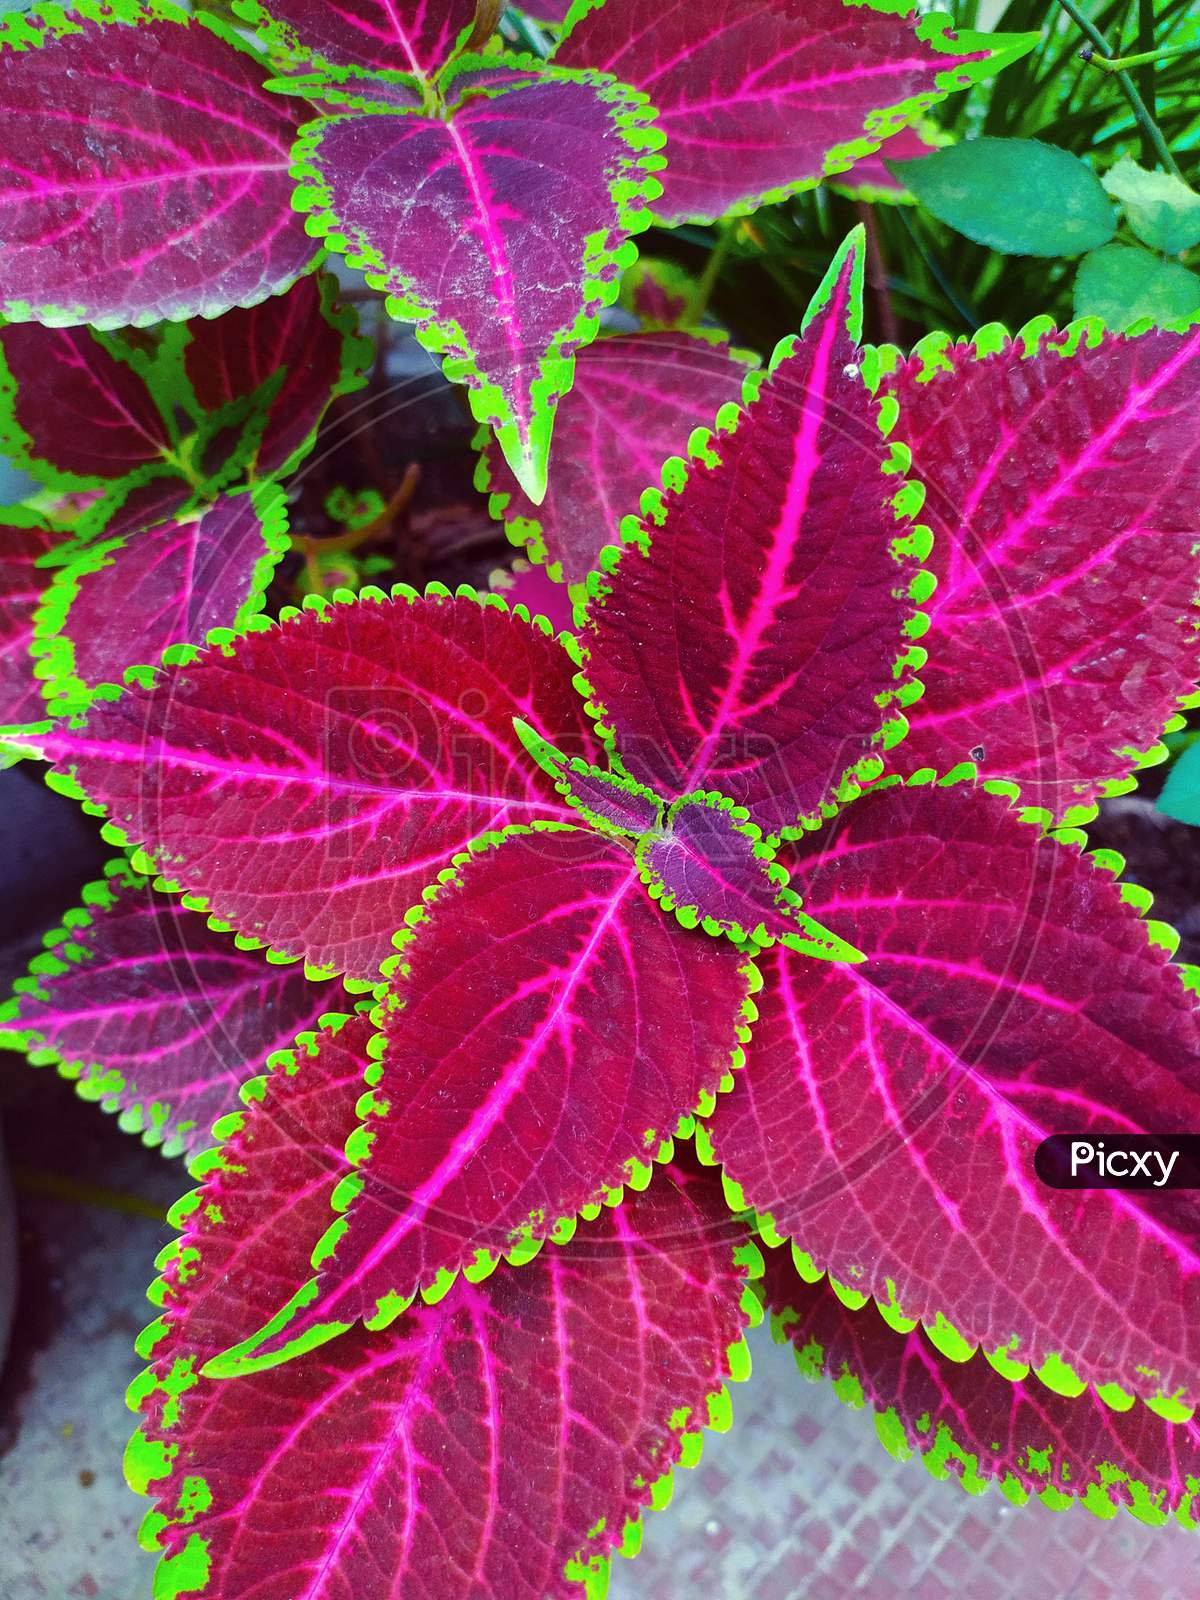 Plectranthus scutellarioides, commonly known as coleus. the most beautiful darkish pink coleus plant leaves